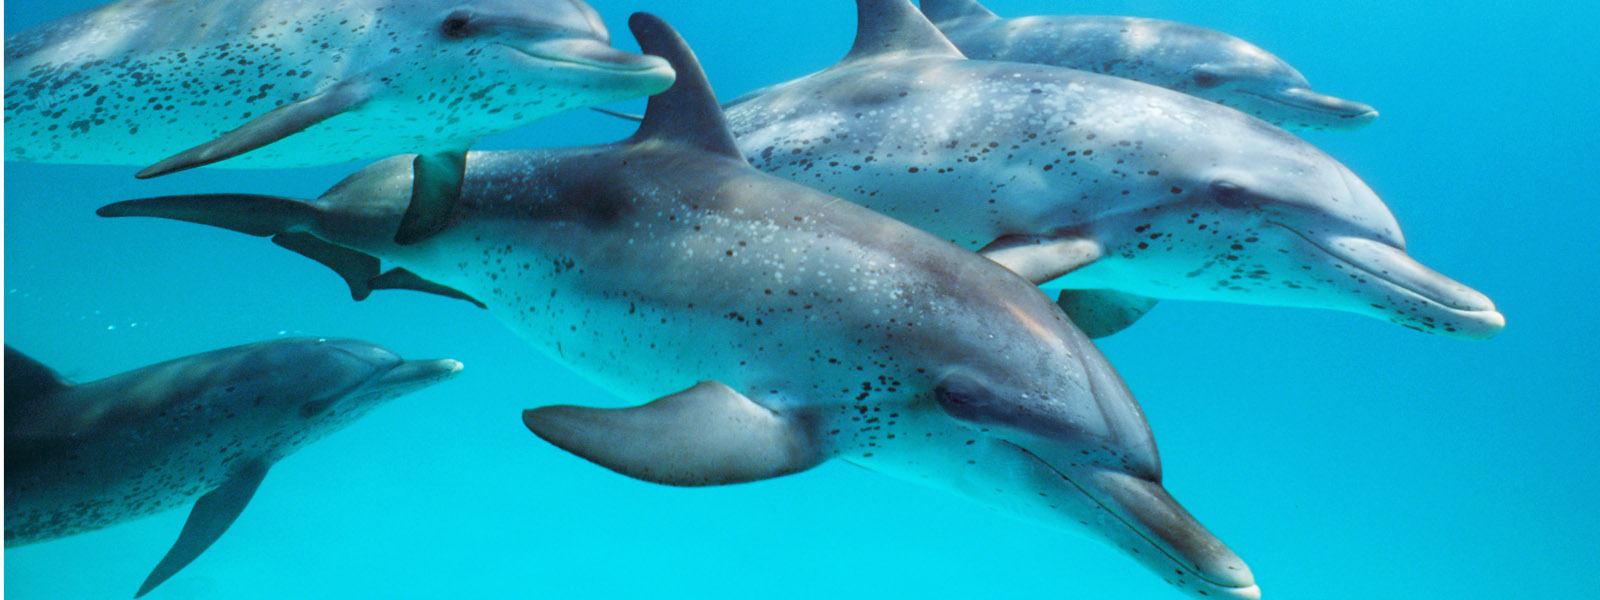 Wallpapers Of Dolphins Hd, - HD Wallpaper 